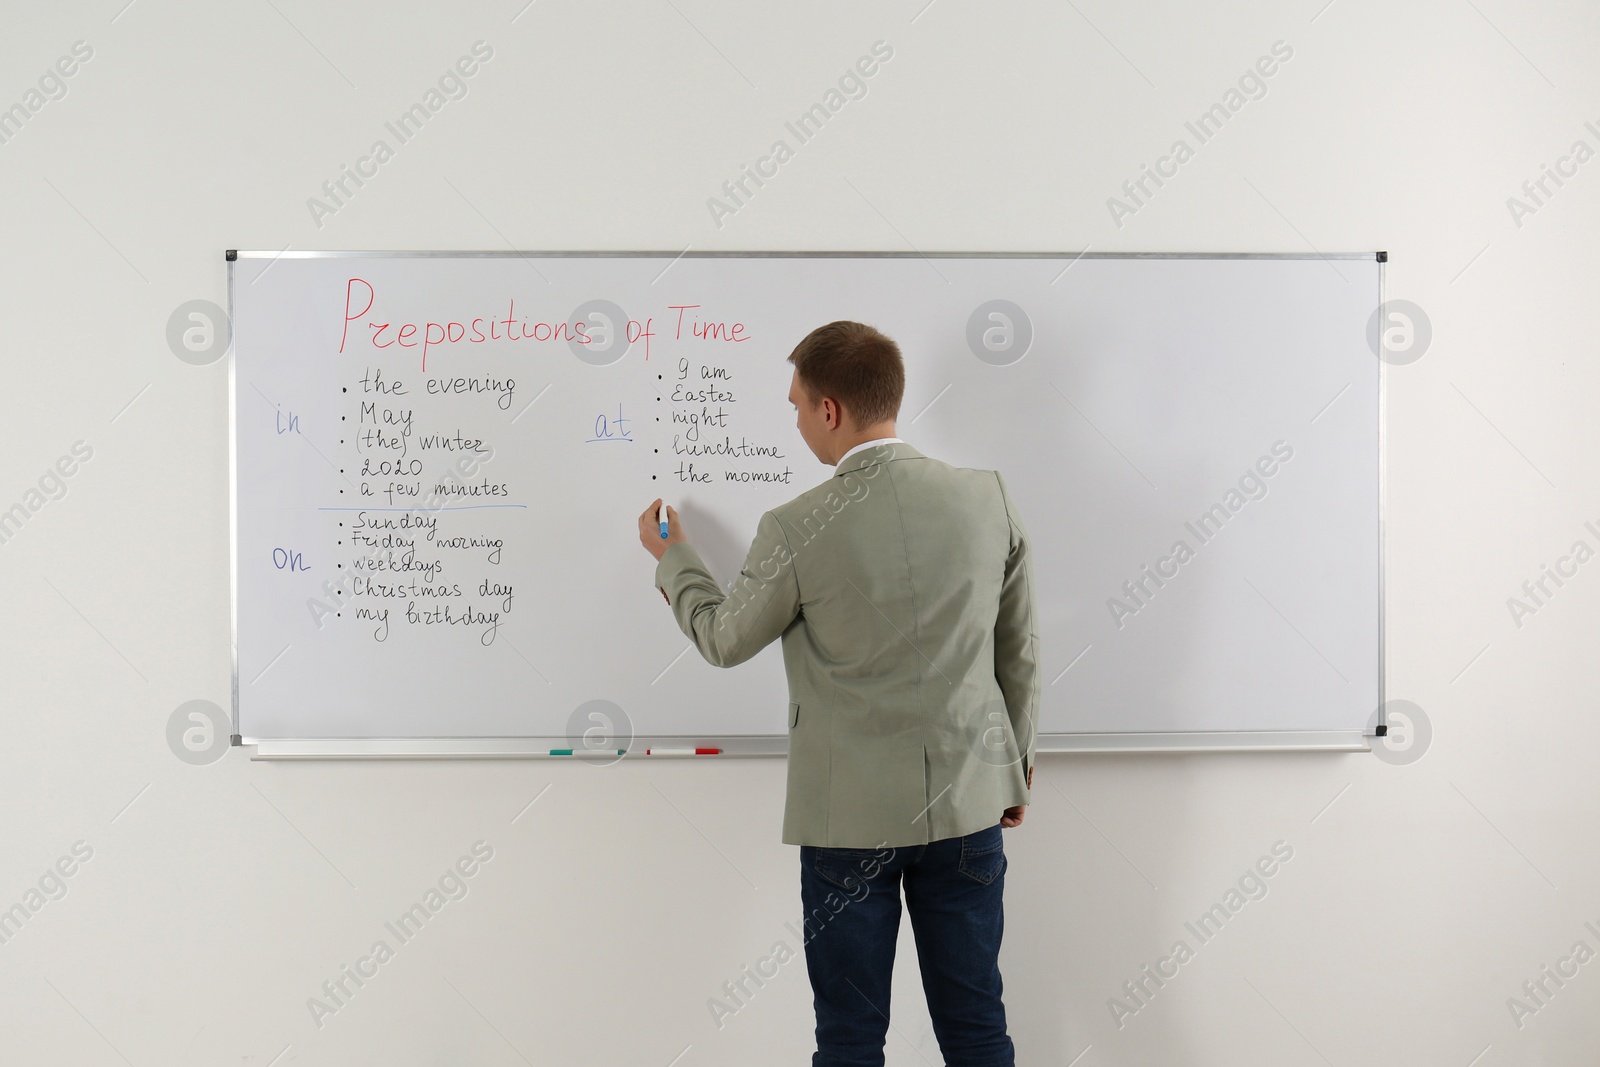 Photo of English teacher giving lesson on prepositions of time near whiteboard in classroom, back view